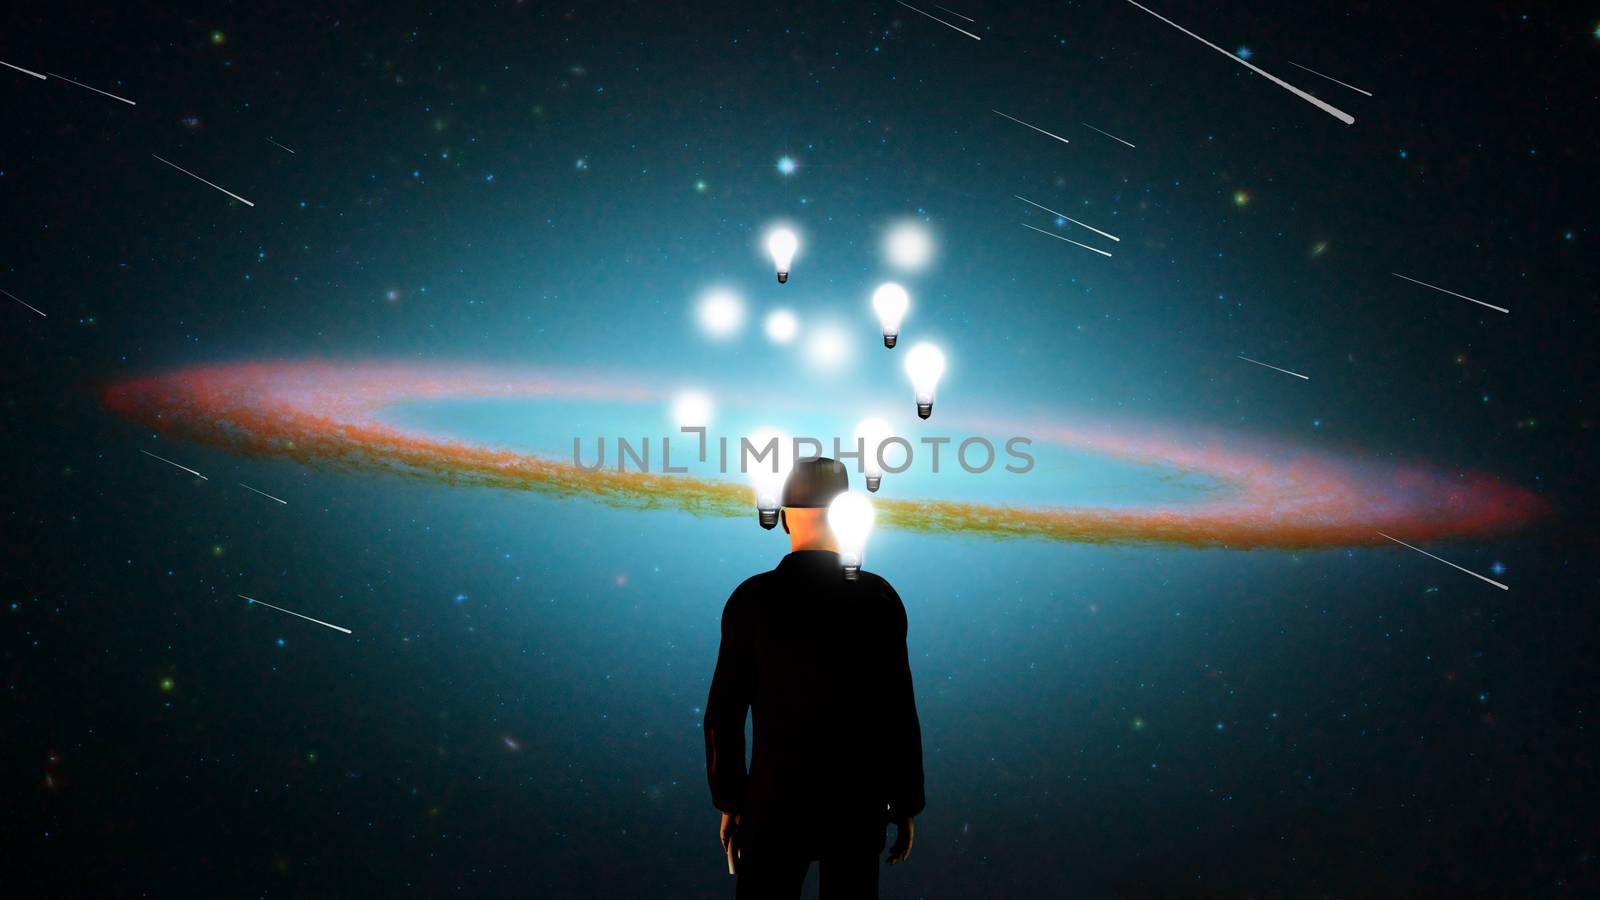 Surreal composition. Man in suit stands before vivid universe. Lightbulbs represents thoughts and ideas. 3D rendering